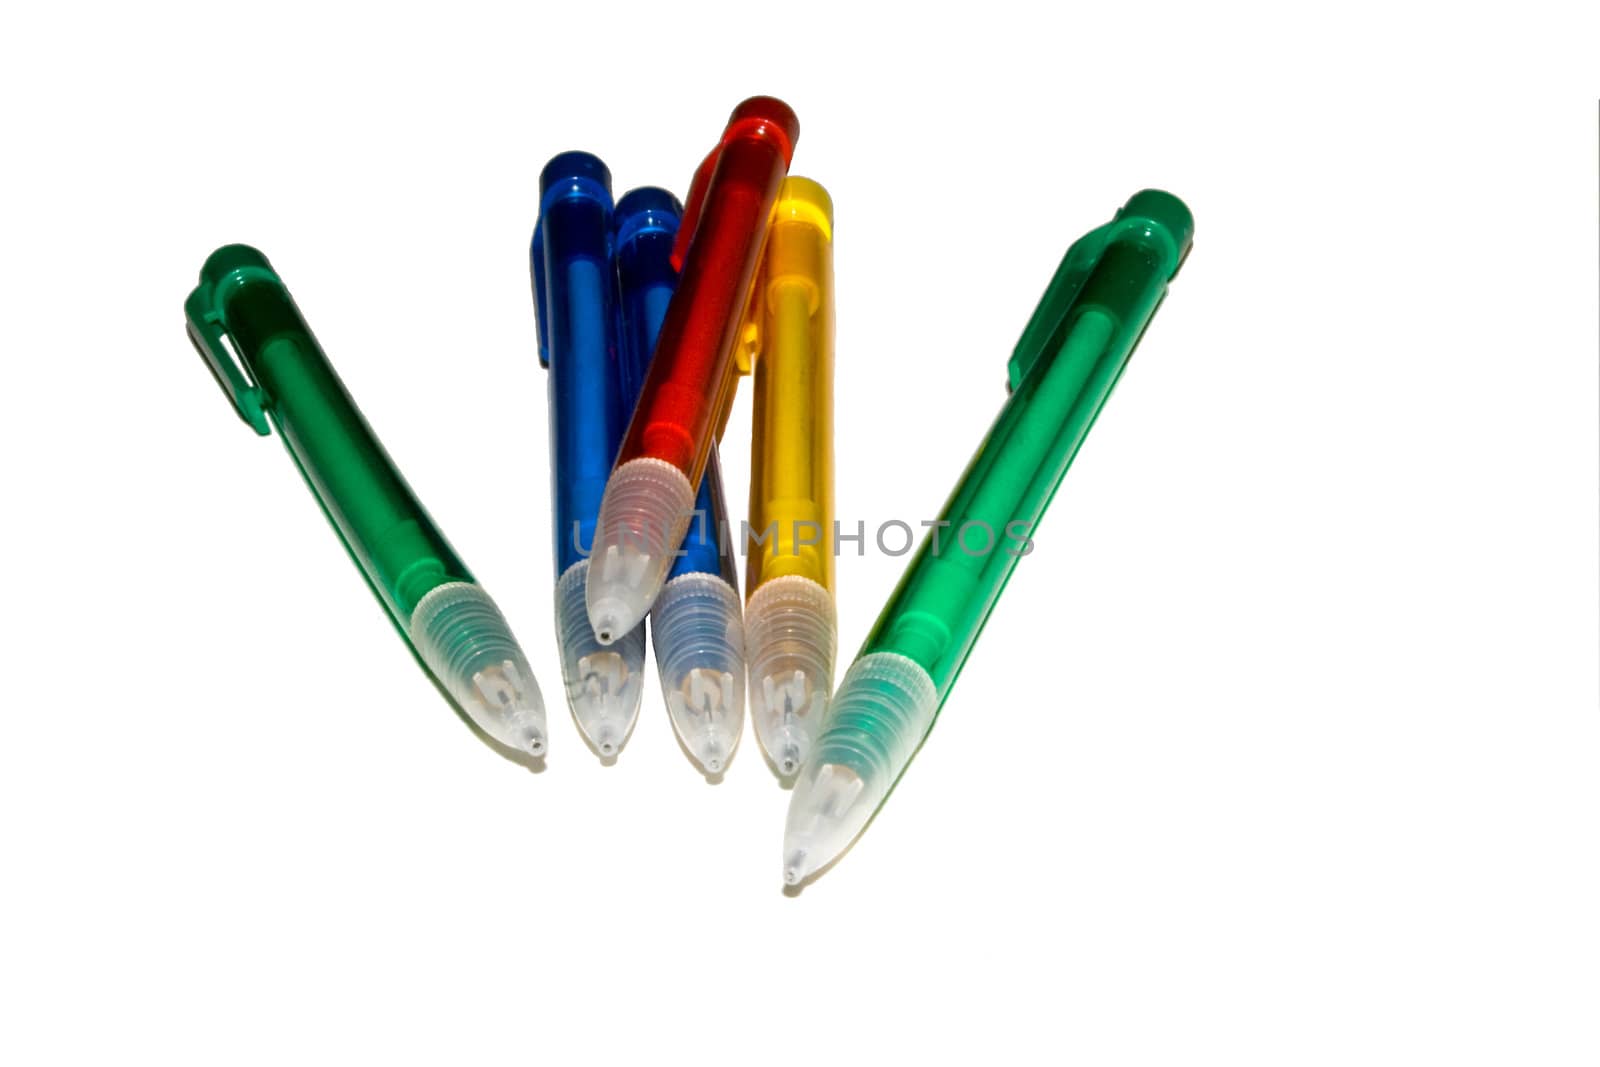 Isolated Mechanical Pencils on a white background